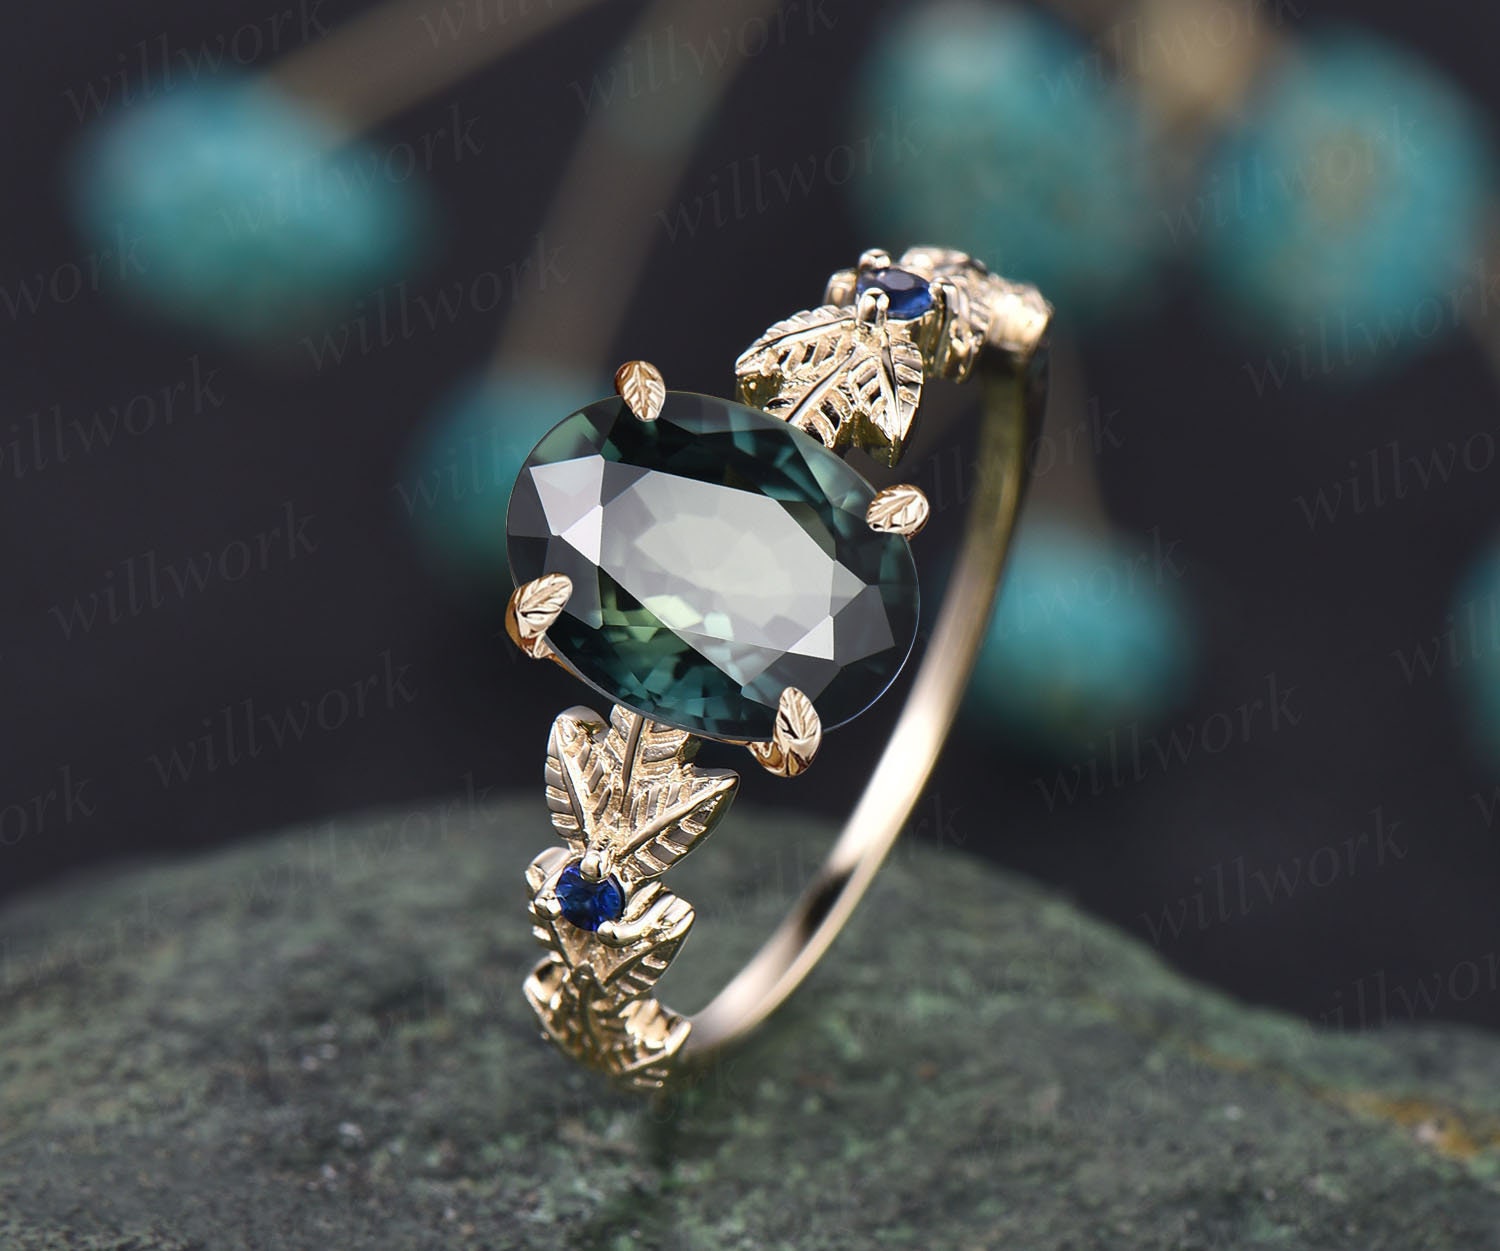 Vibraant Jewels Ladies Emerald Gemstone Diamond Silver Ring, Weight: 4 Gm  at Rs 70000 in Jaipur